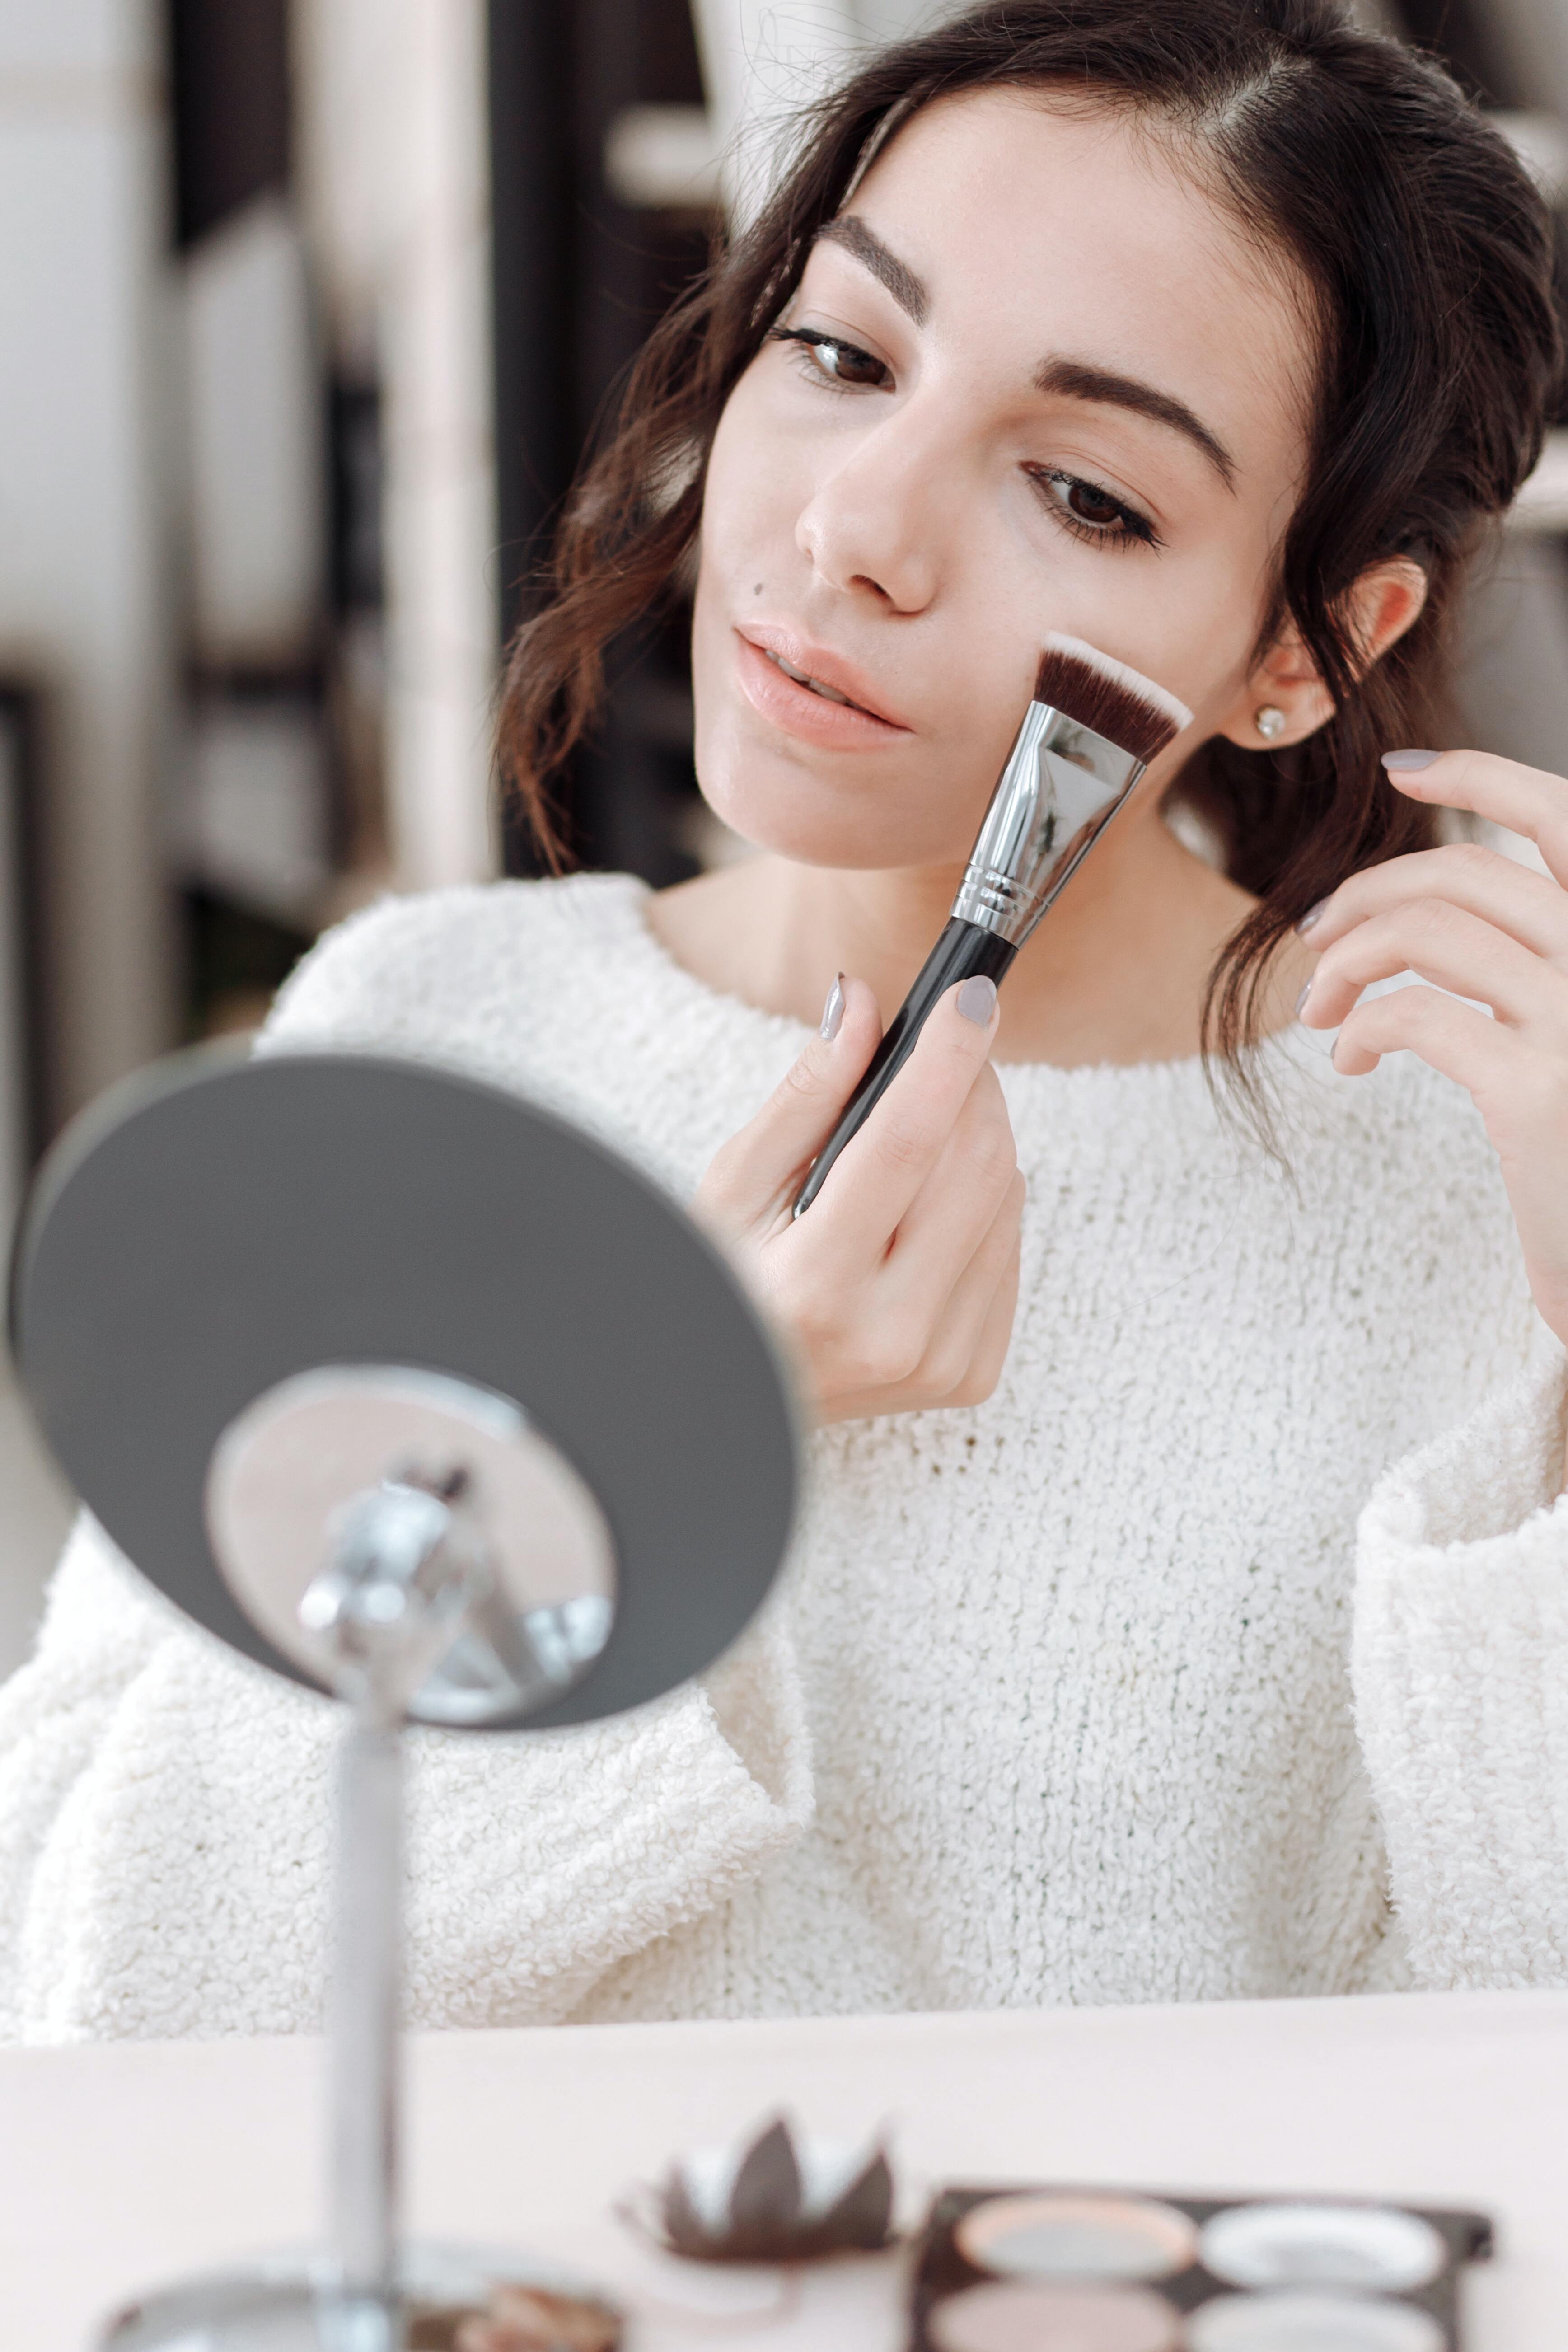 A woman applying a product on her face using a brush